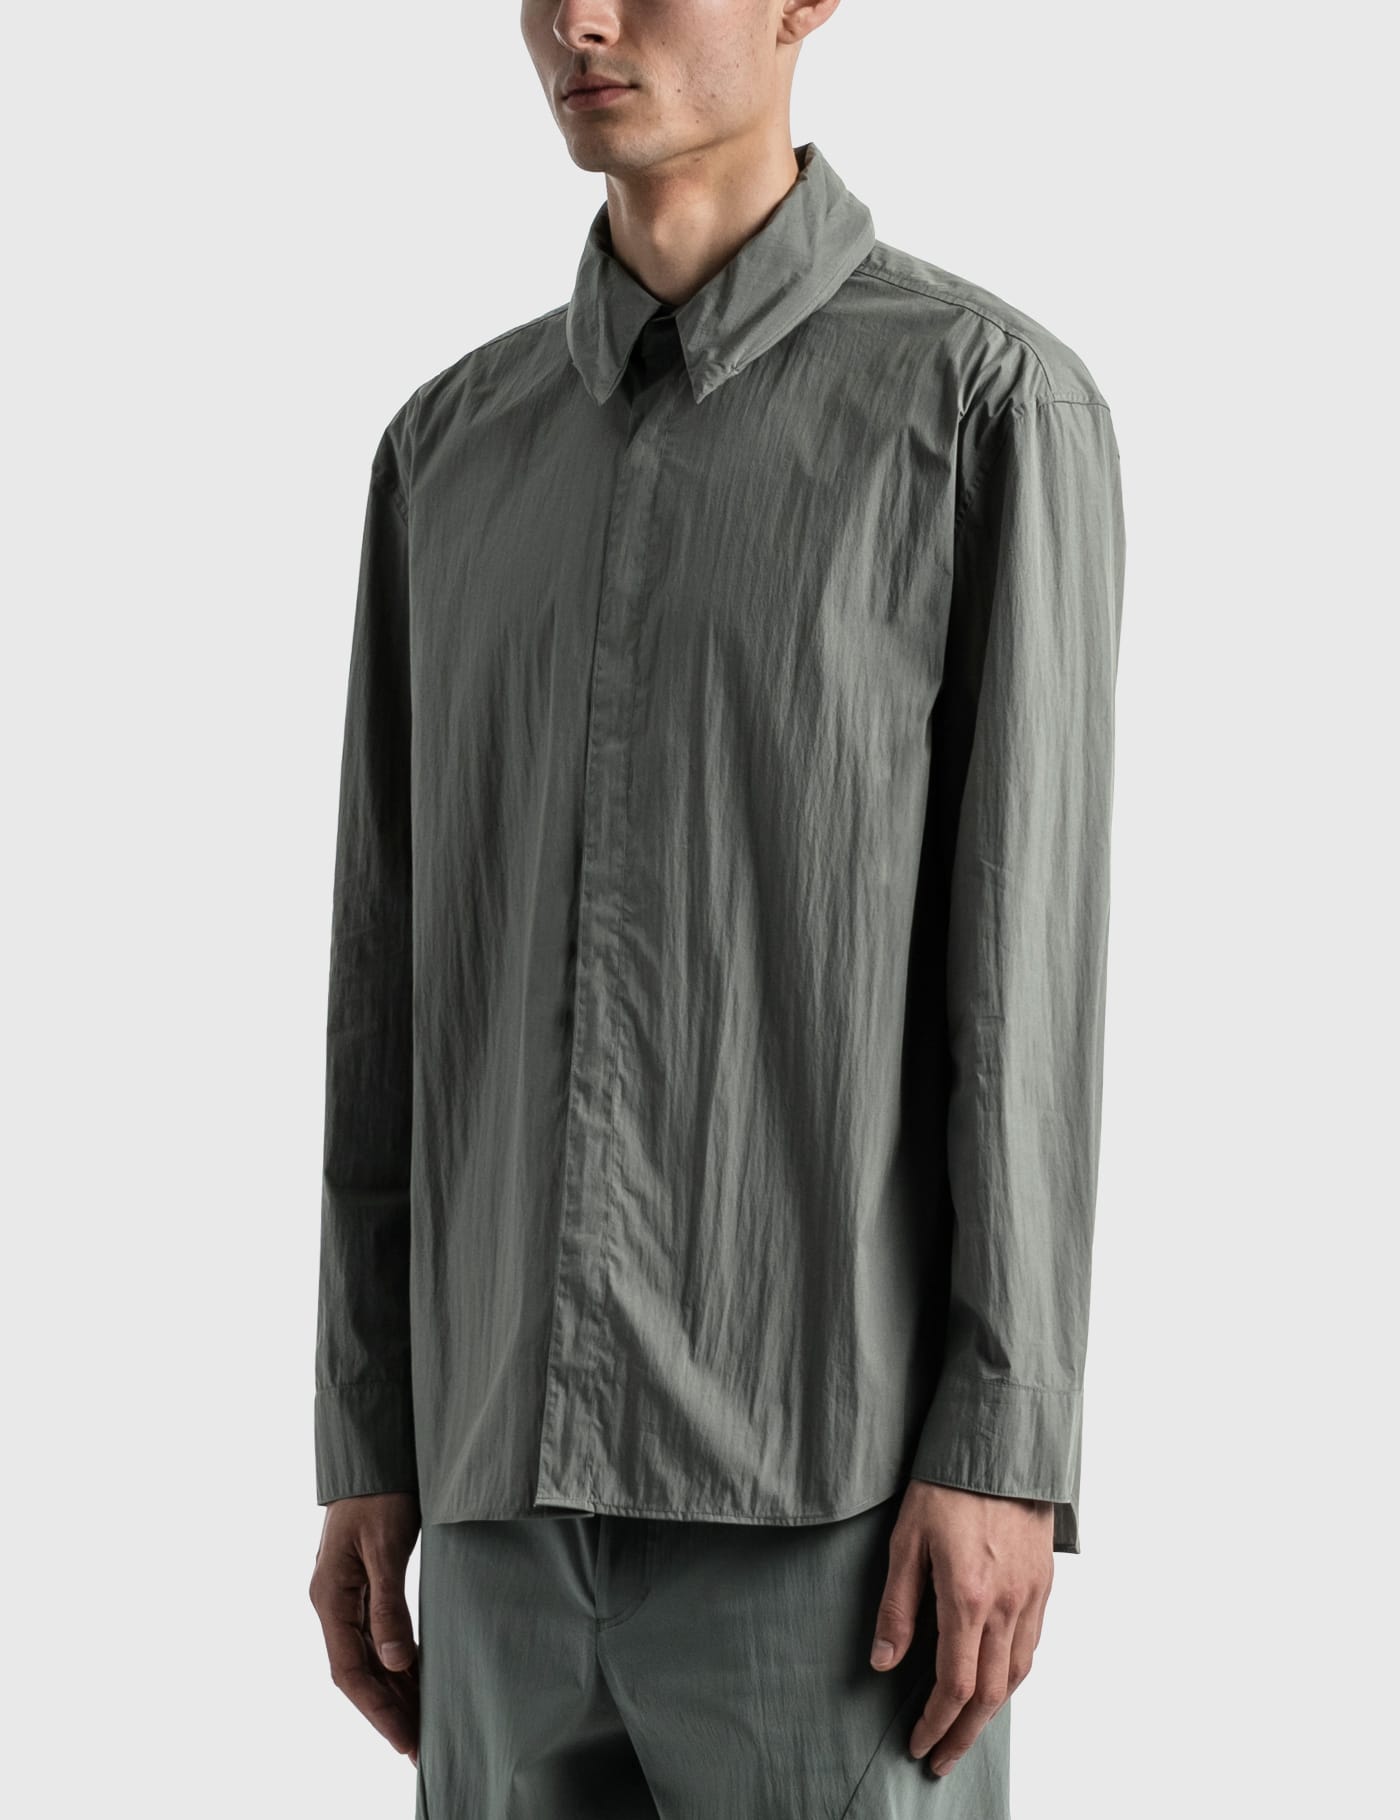 POST ARCHIVE FACTION (PAF) - 4.0 Shirt Right | HBX - ハイプ ...